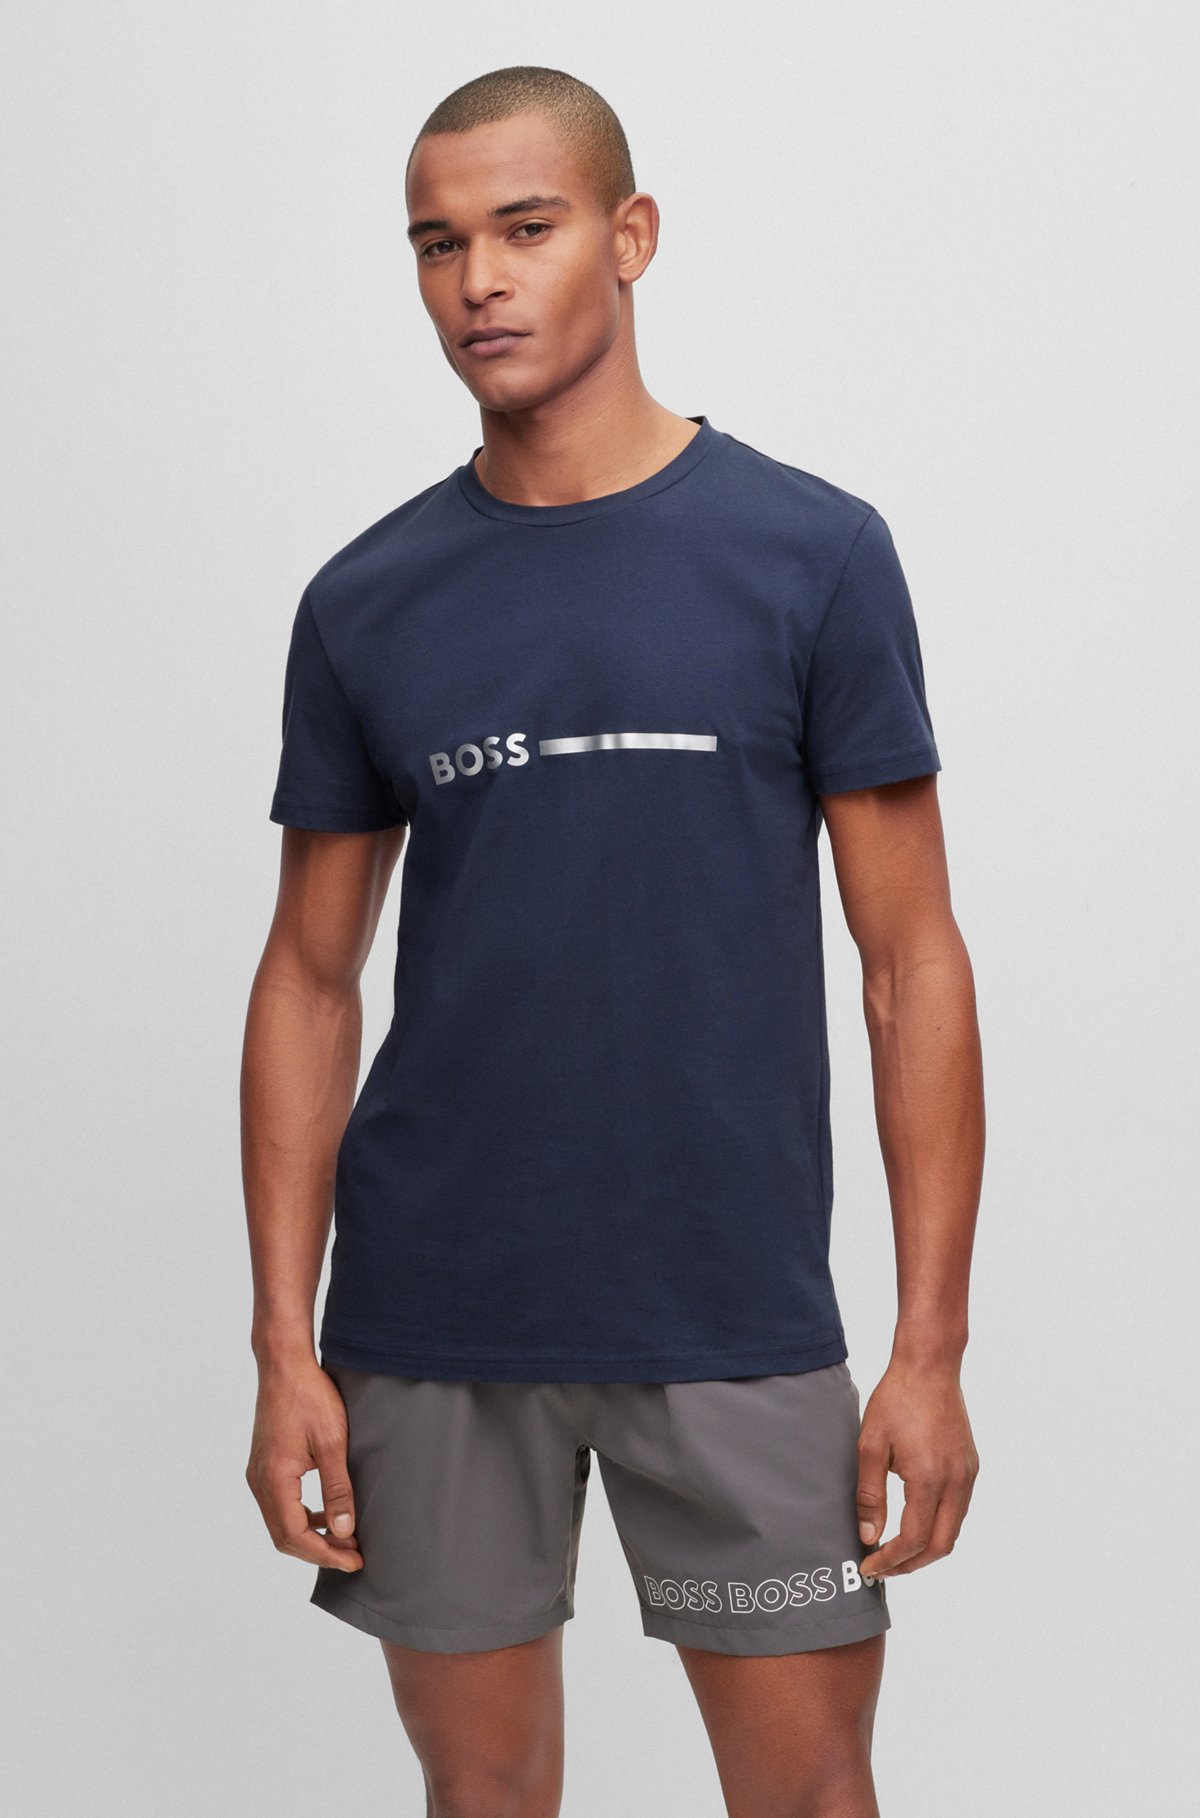 BOSS - Regular-fit T-shirt in cotton with UV protection